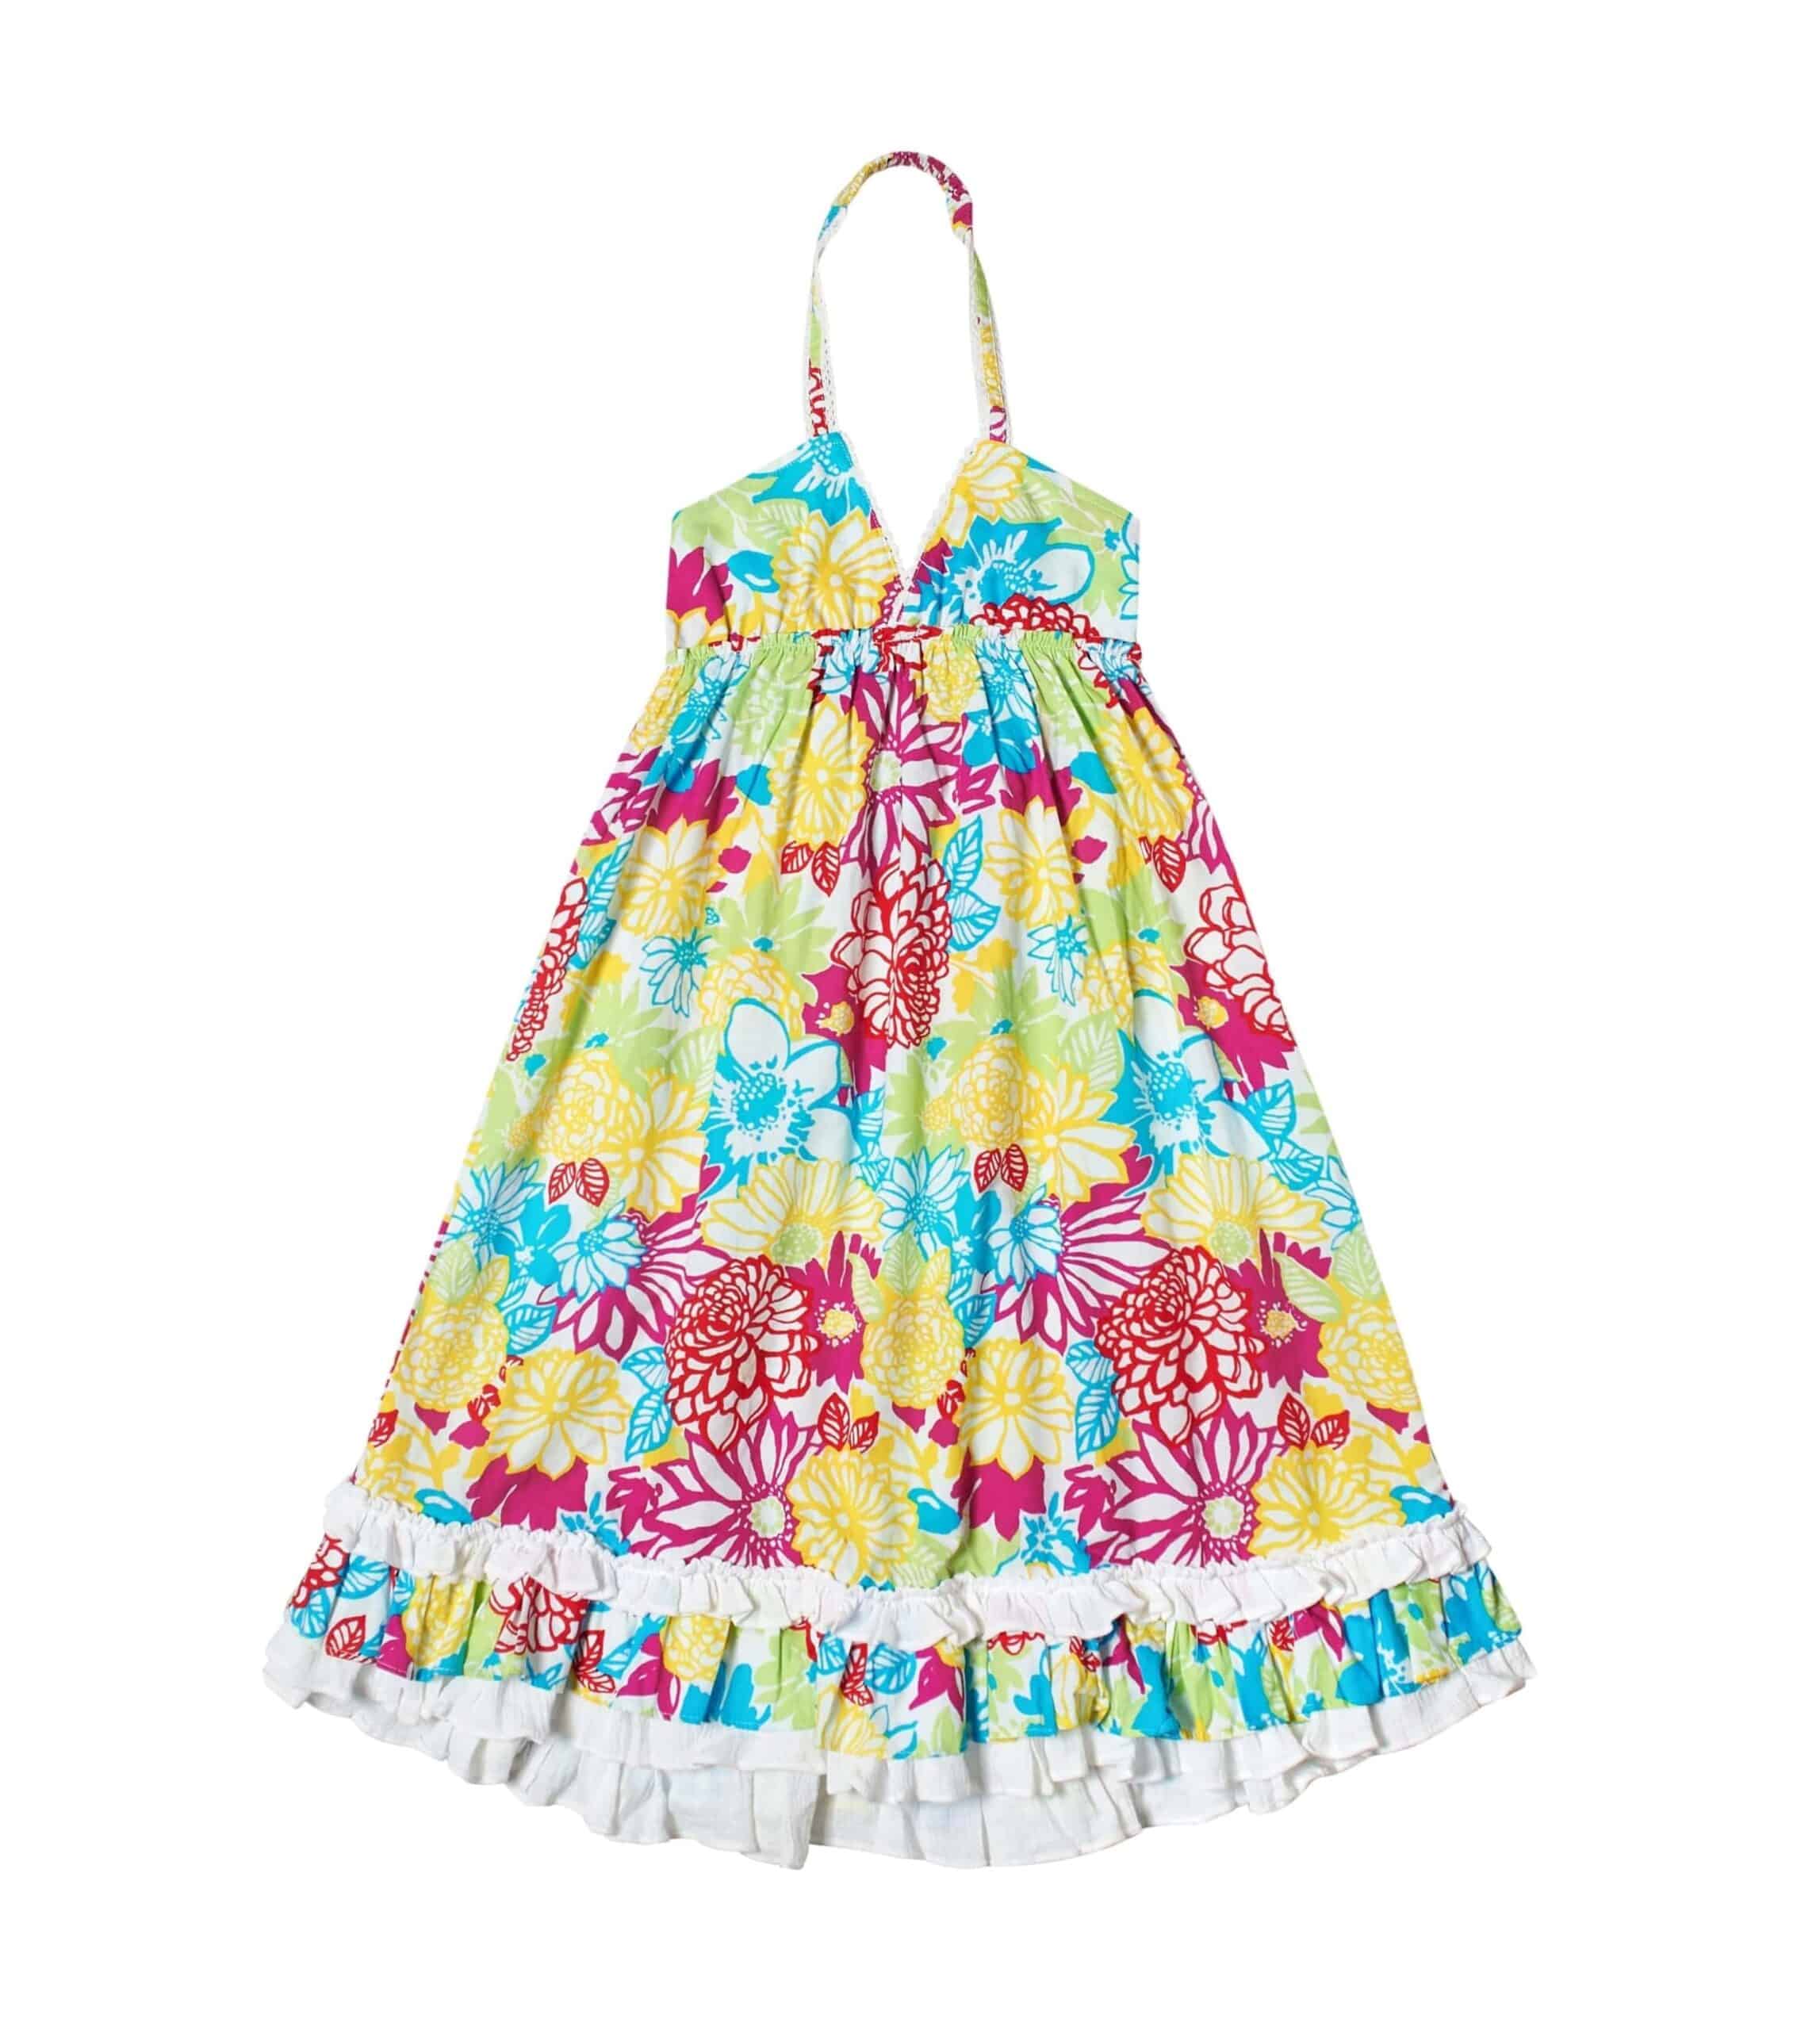 Summer long beach dress for girls in multicolored hawaï cotton, yellow, turquoise blue, fuchsia from the fashion brand for children LA FAUTE A VOLTAIRE